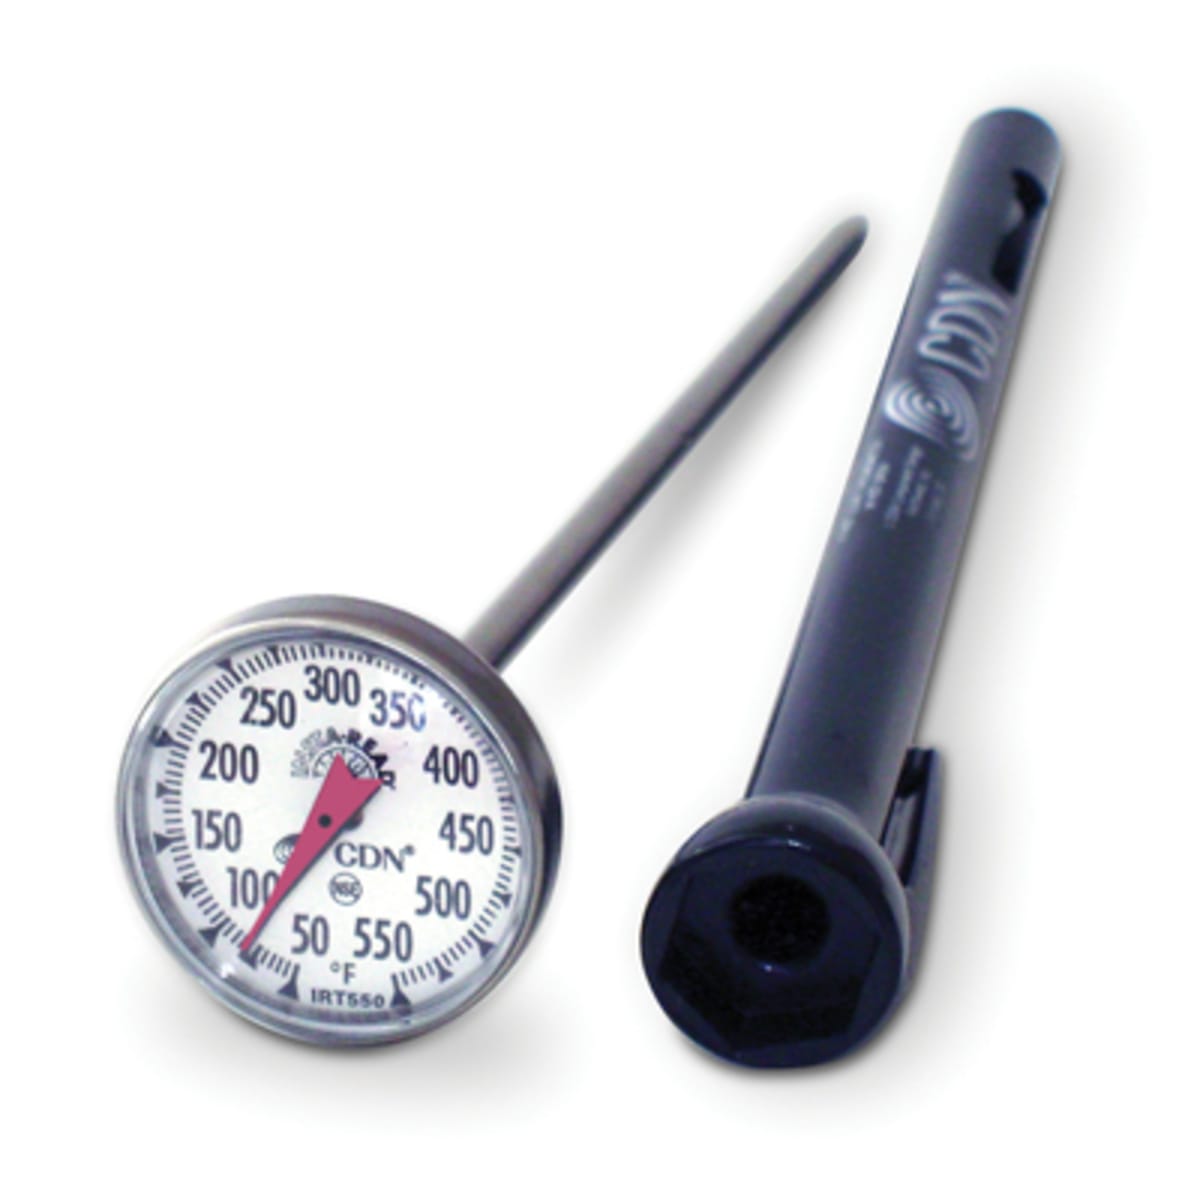 Foodservice - Thermometers - CDN Measurement Tools